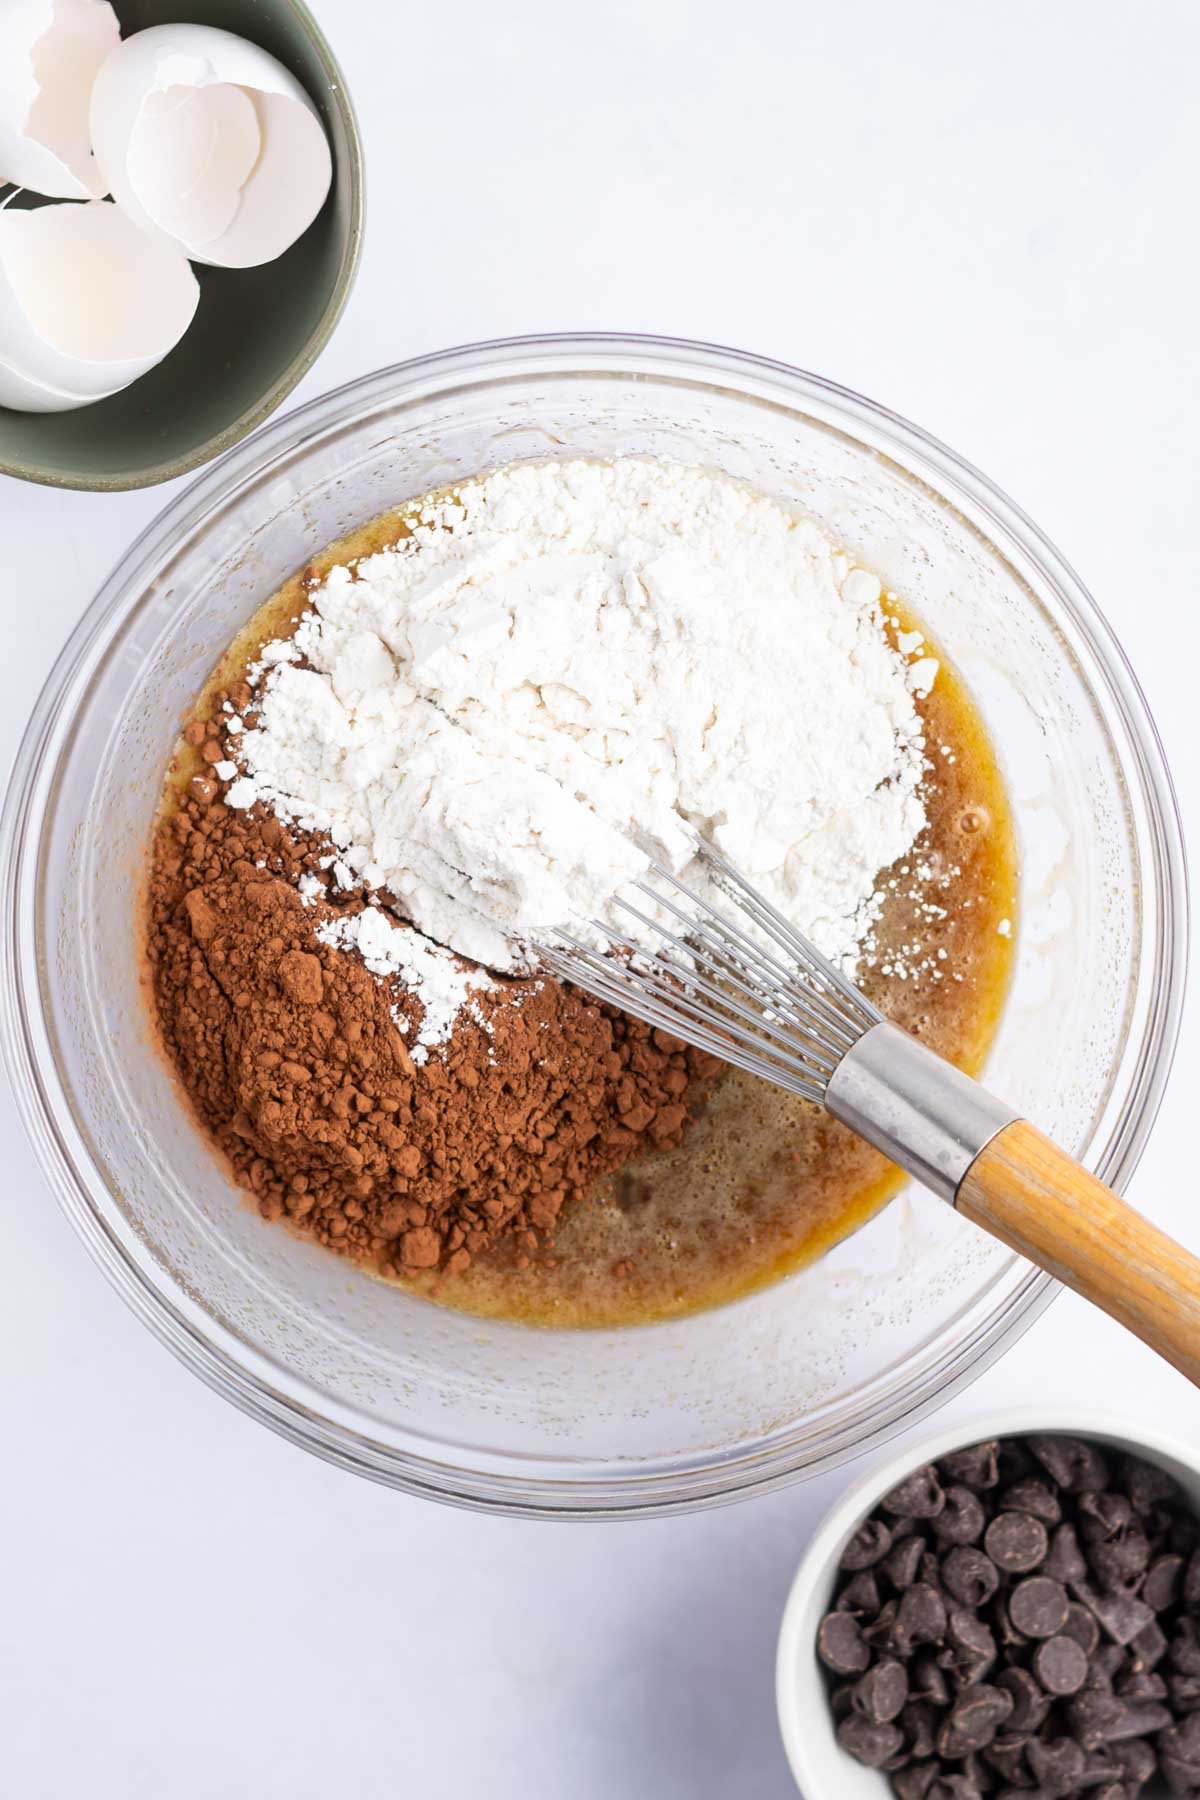 flour and cocoa powder added to wet ingredients in a bowl